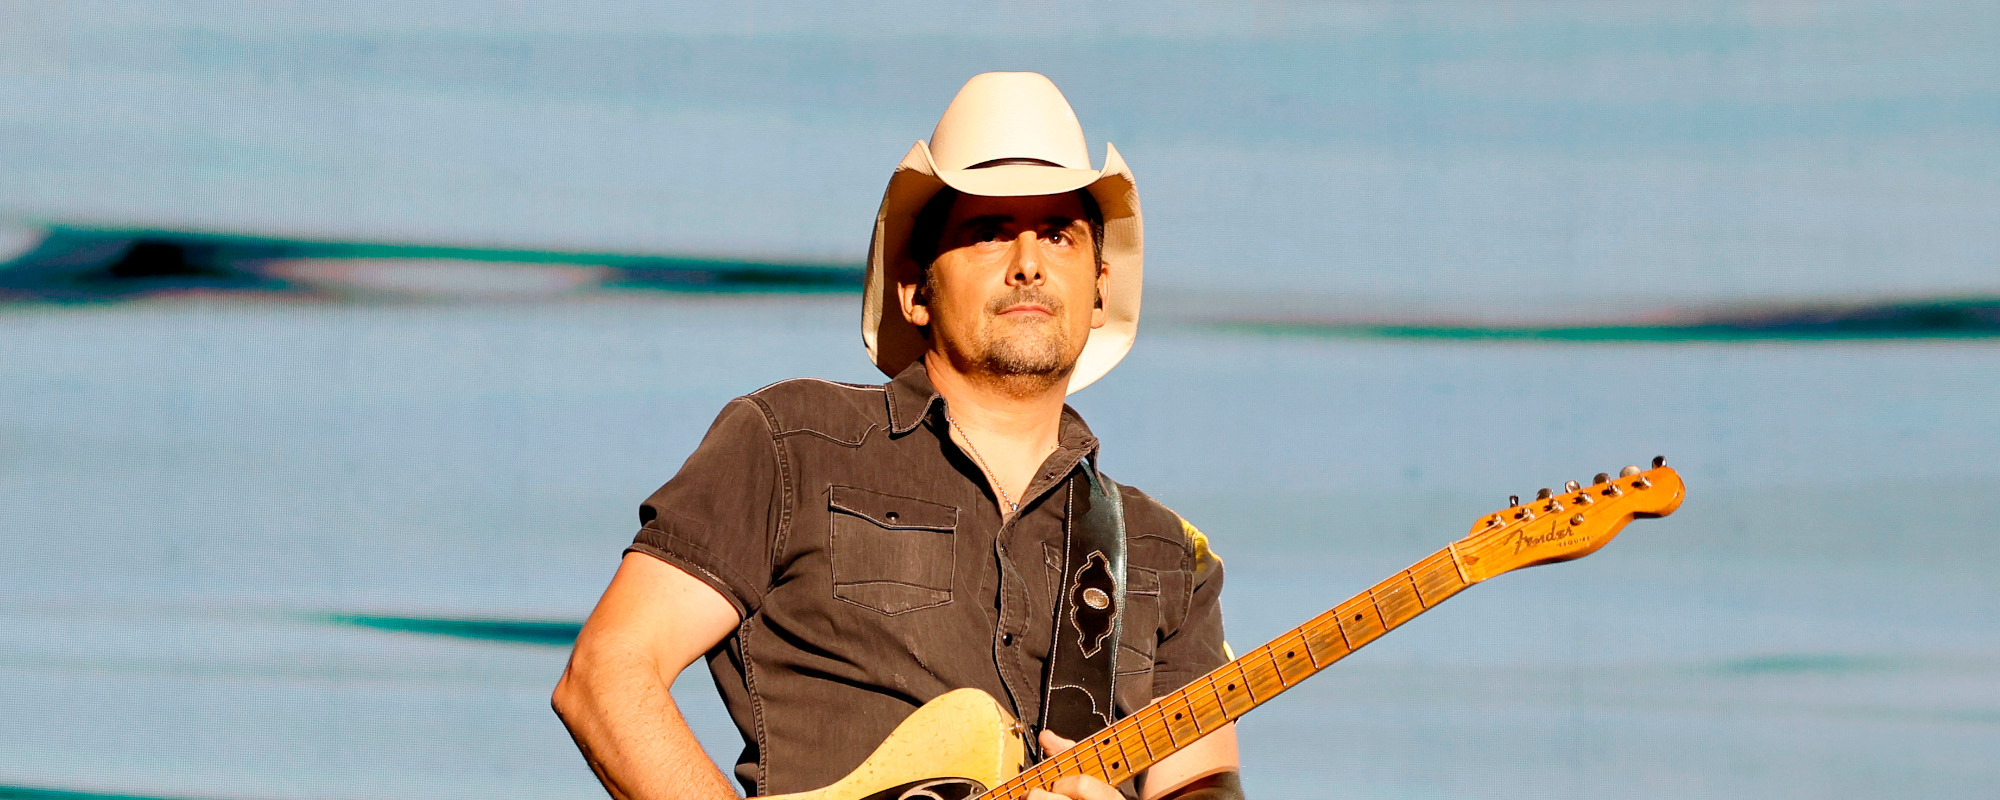 The Meaning Behind “Accidental Racist” by Brad Paisley